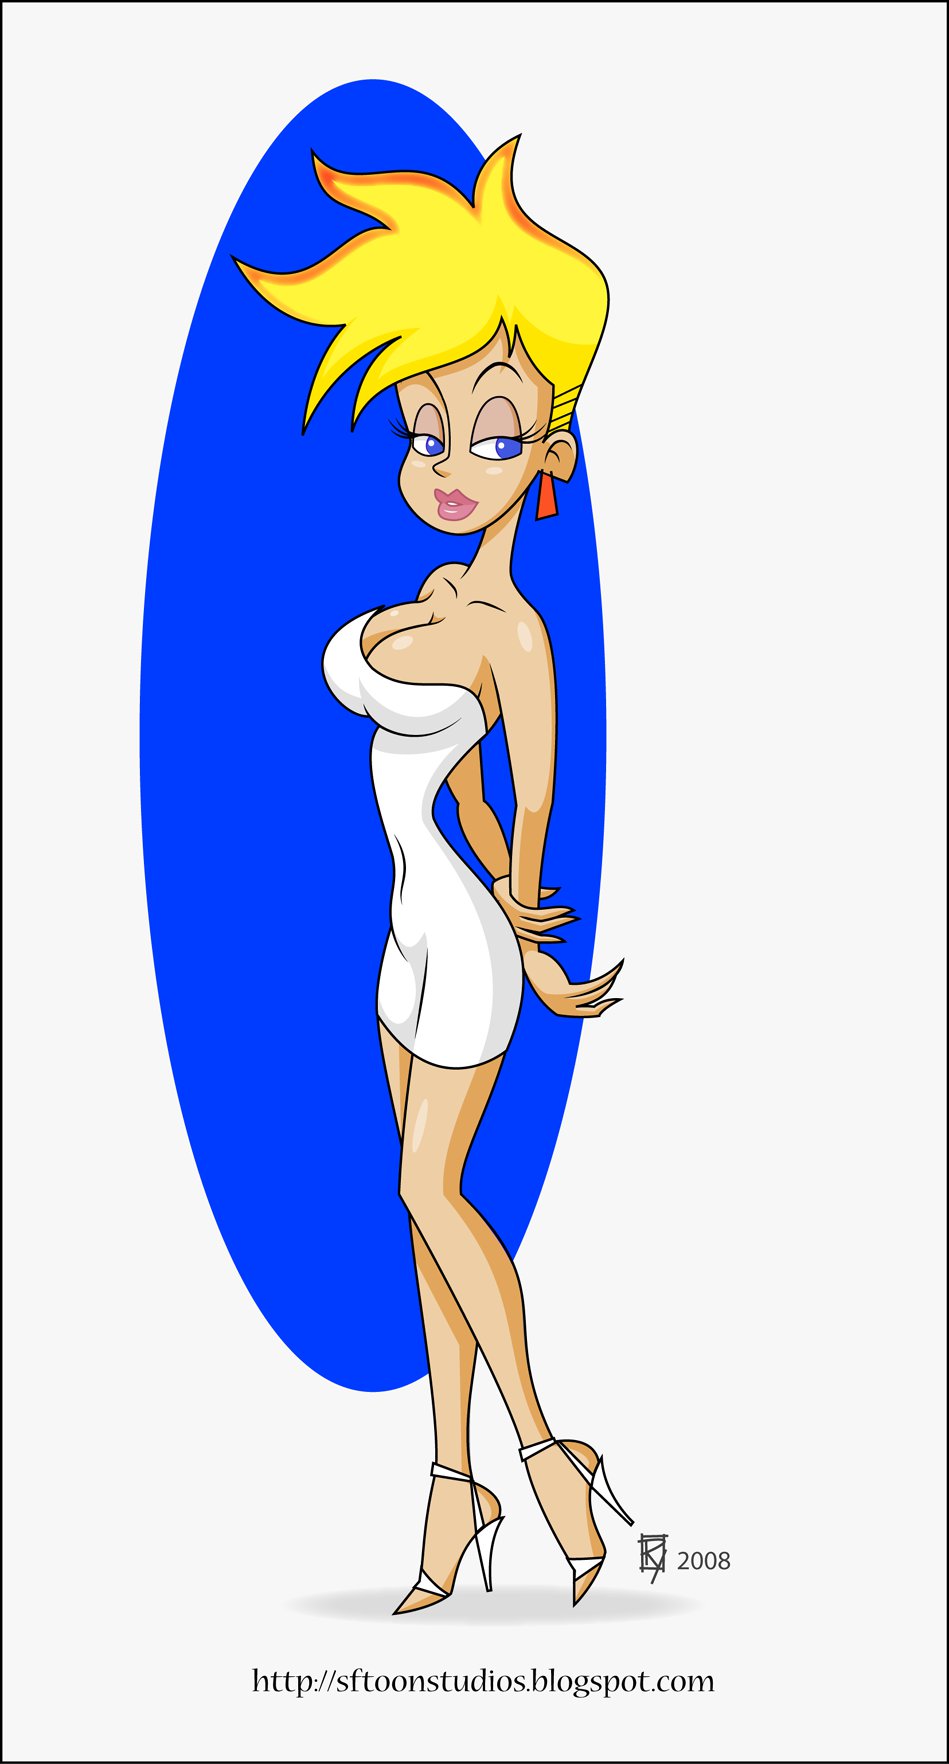 Johnny Test Mom - Johnny Test Gender Bender Gallery - Page 4 - IMHentai